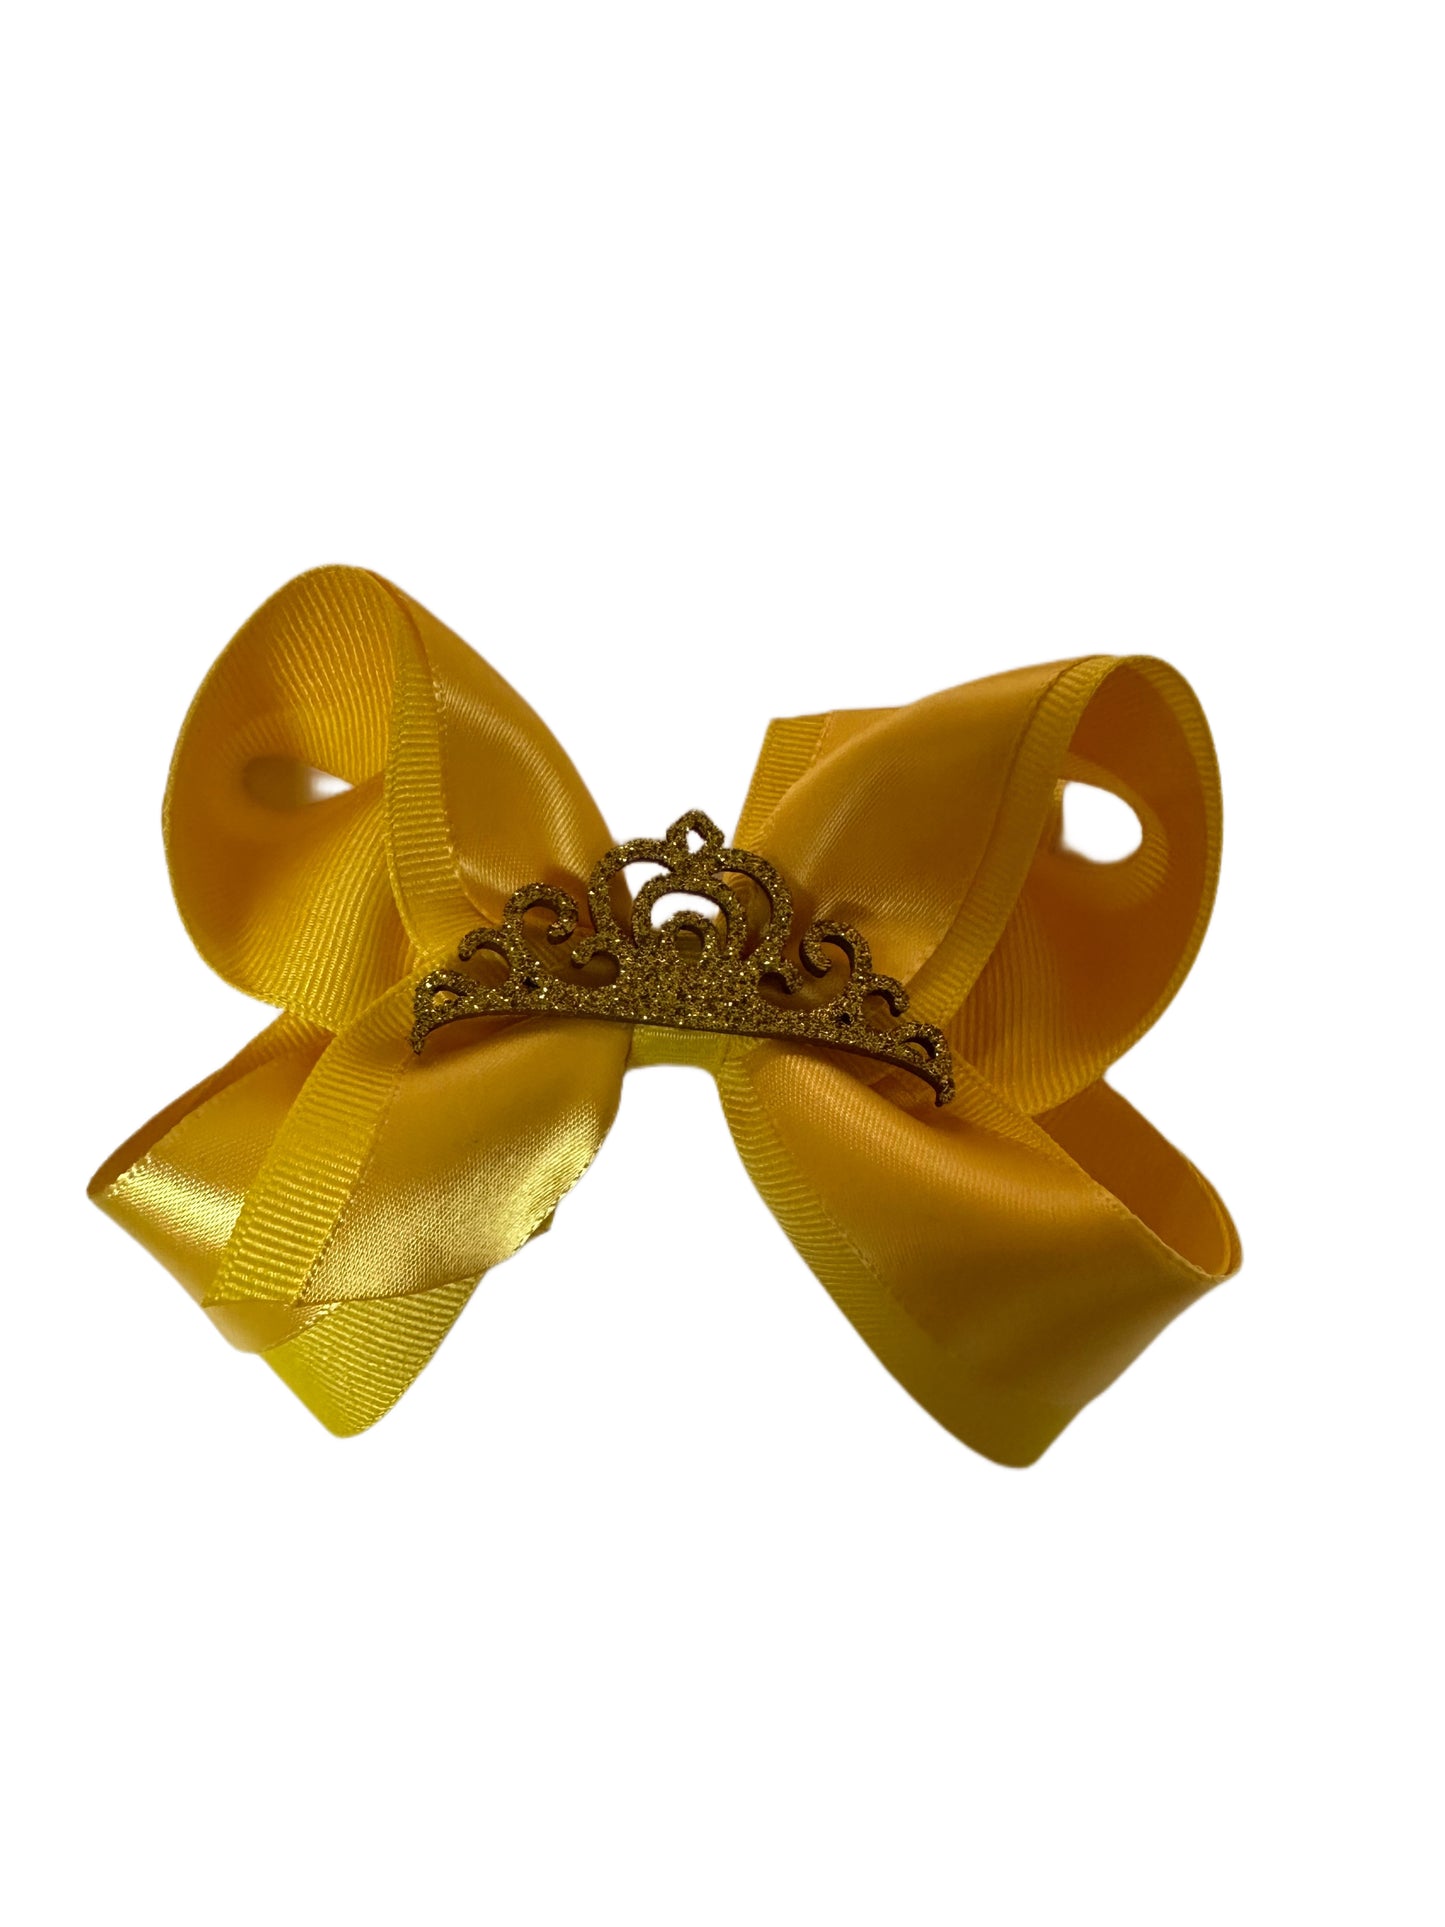 Med. Grosgrain Bow w/Satin Overlay and Glitter Crown (6 color options)